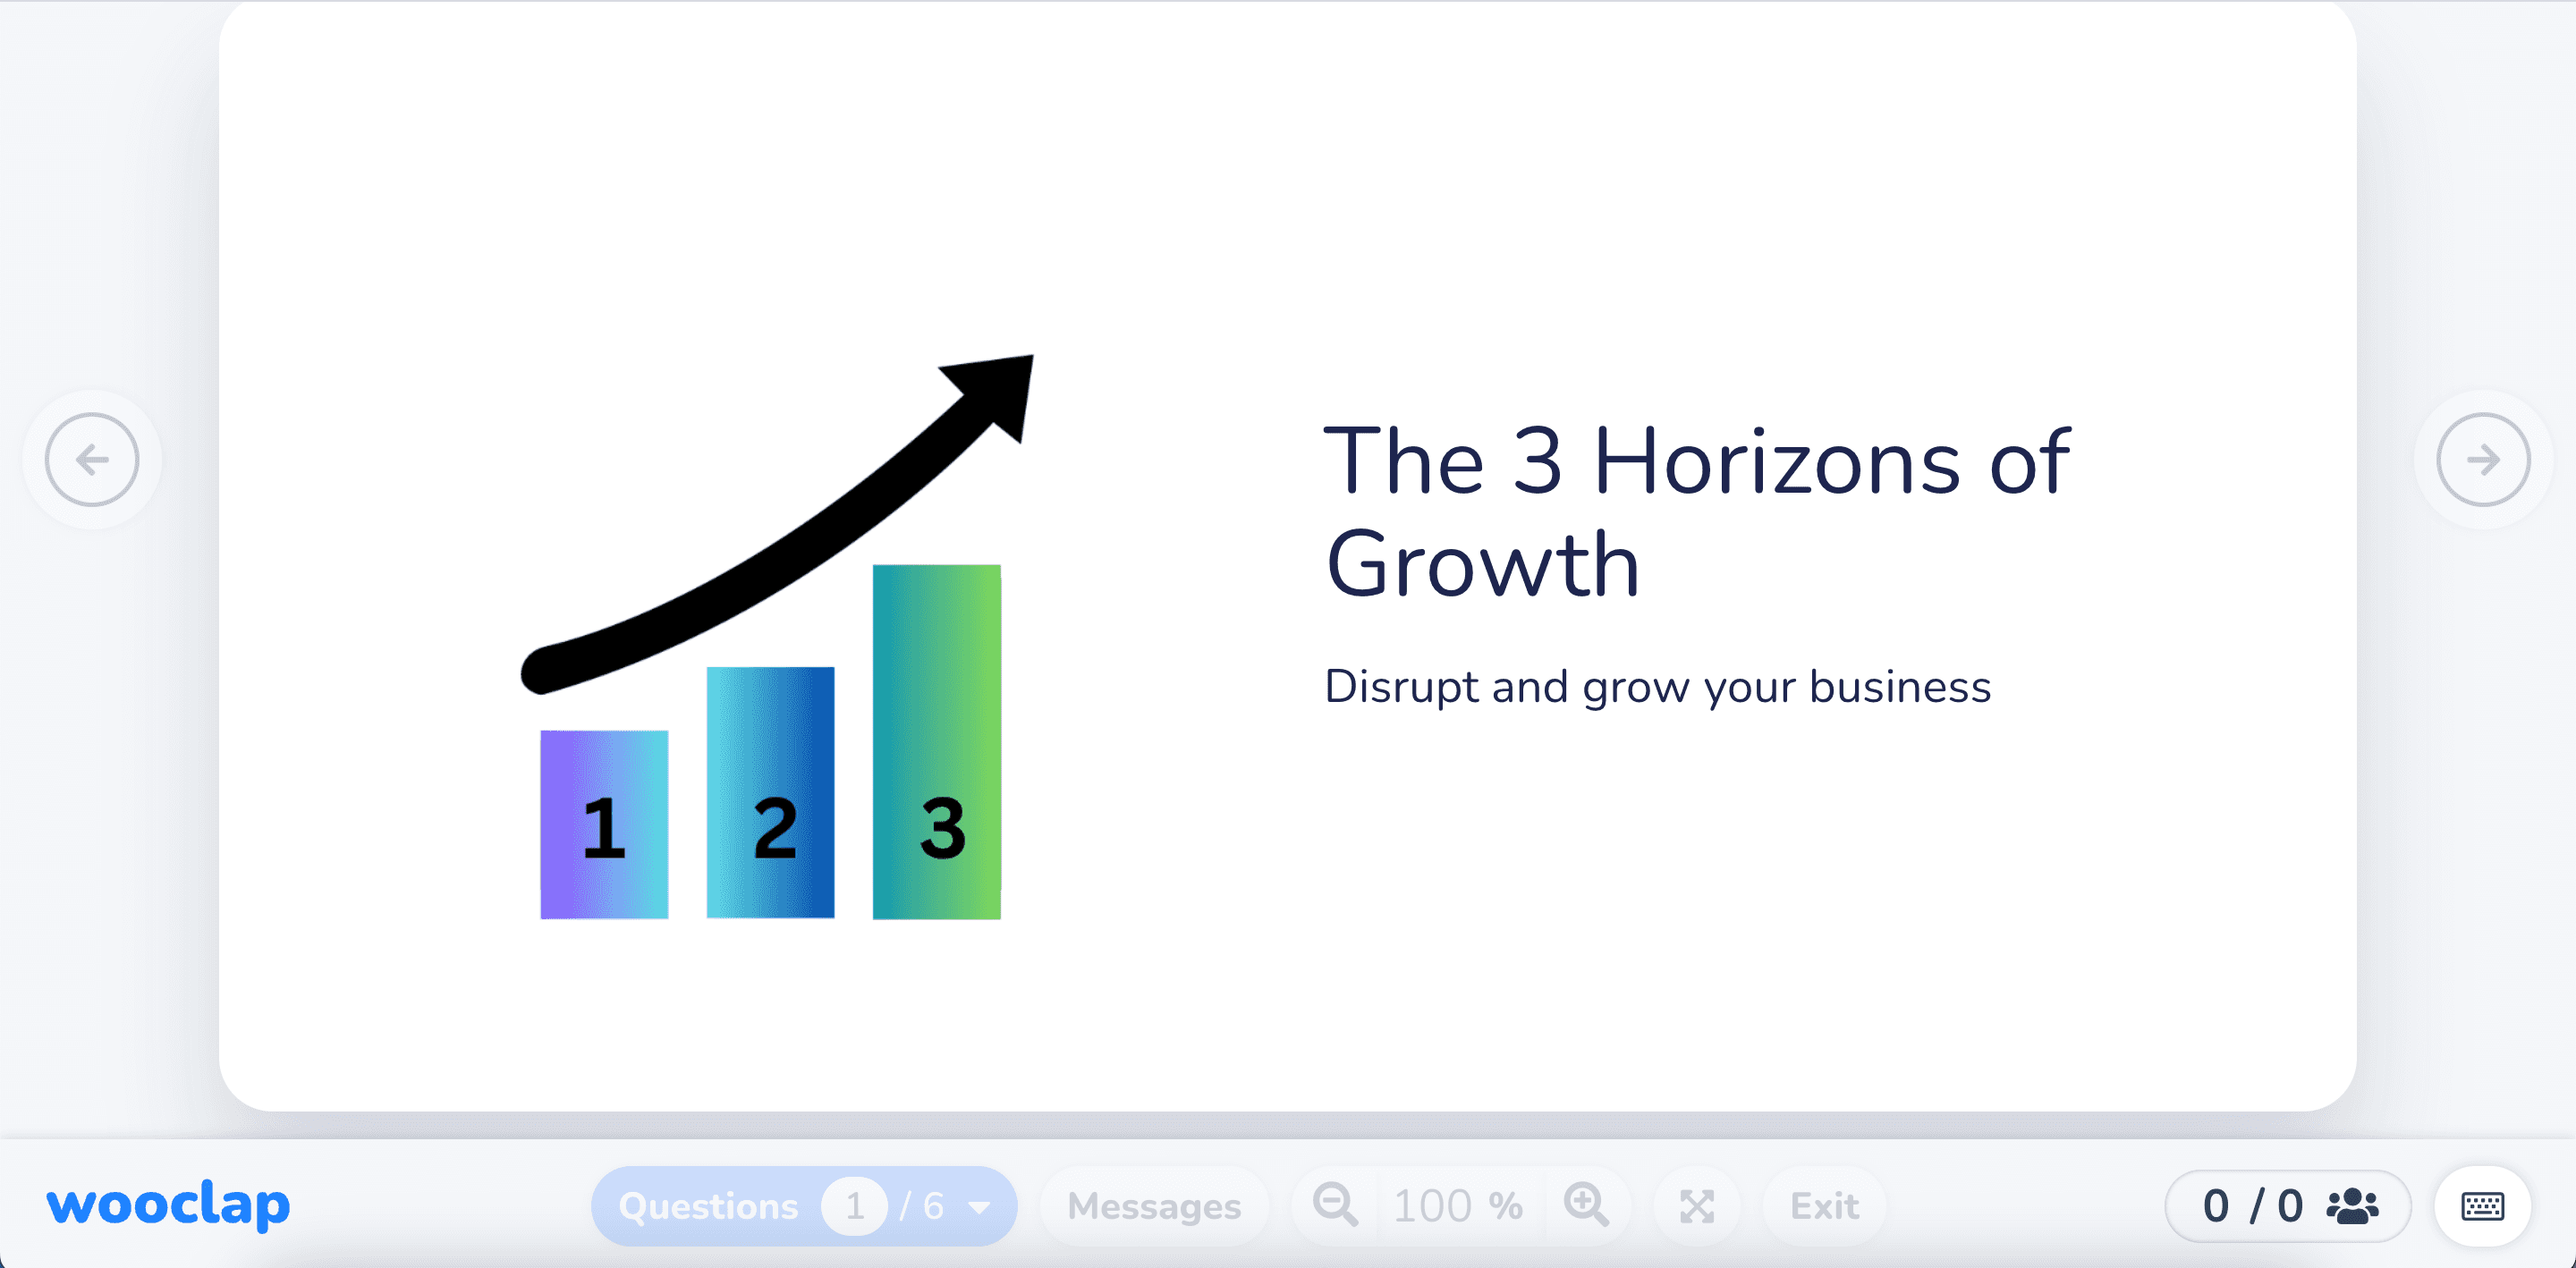 The 3 Horizons of Growth
Disrupt and grow your business